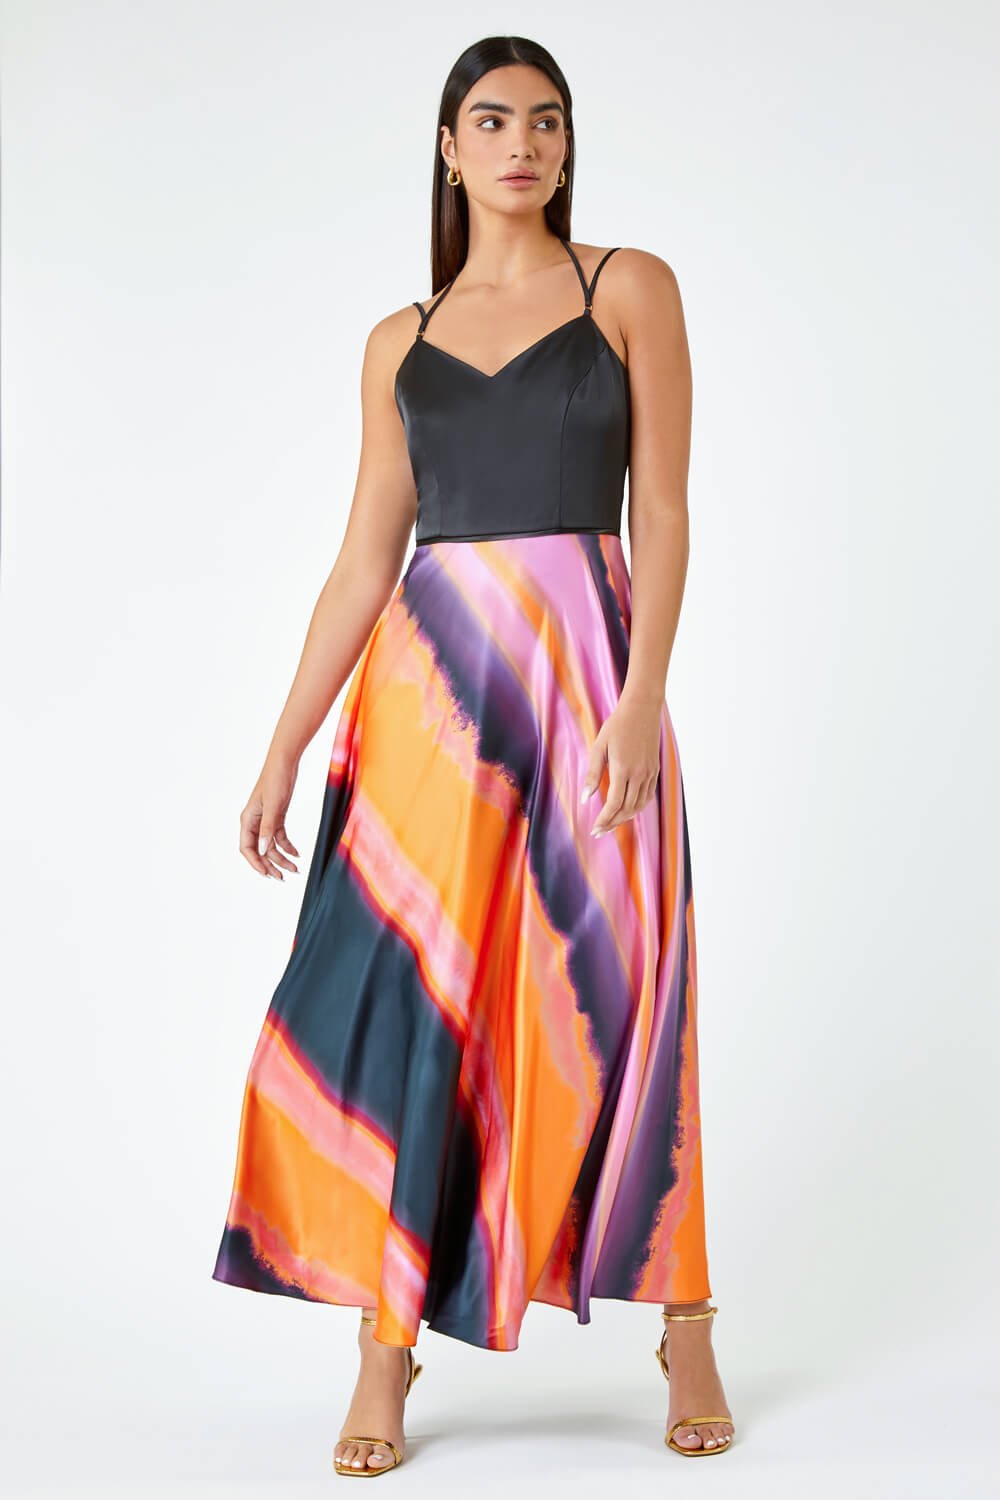 PINK Luxe Colourblock Fit & Flare Maxi Dress, Image 2 of 6